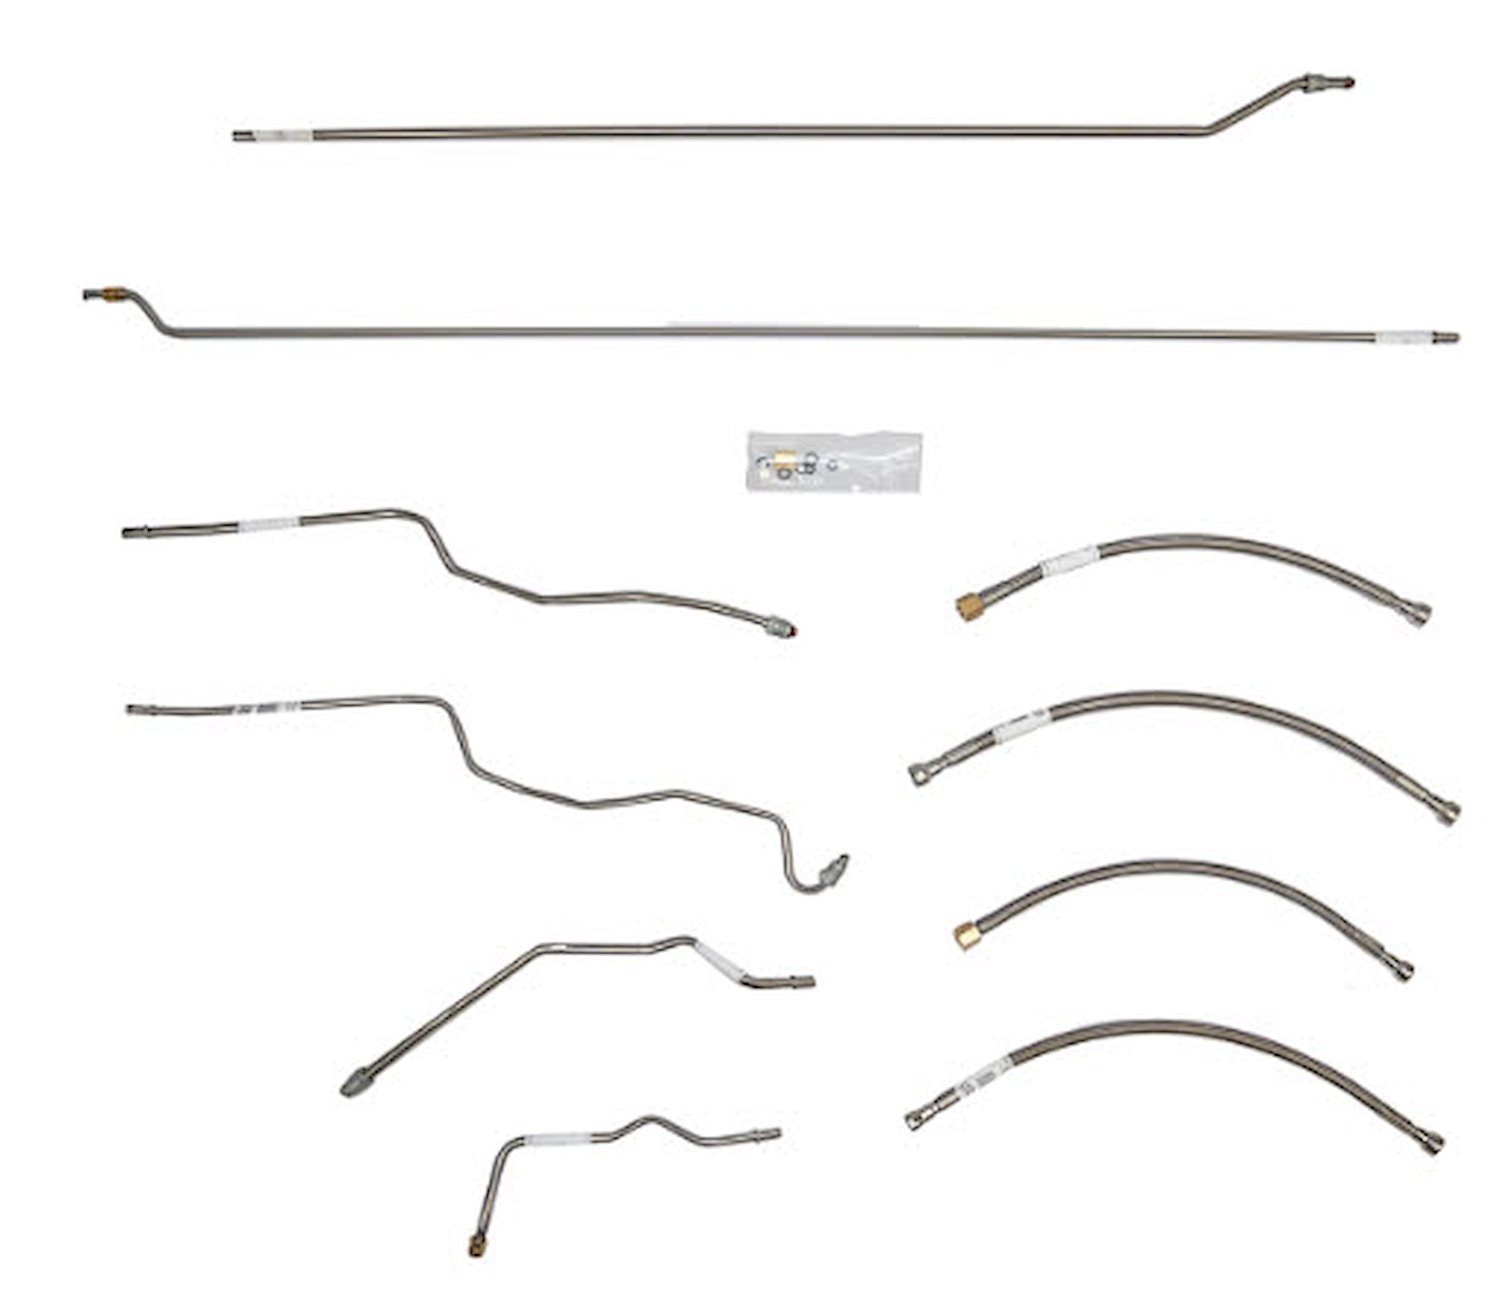 Complete Fuel Line Kit for 1988-1995 Chevy K1500, GMC K1500 4WD Reg. Cab/Long Bed w/5.7L Eng. [Stainless Steel]